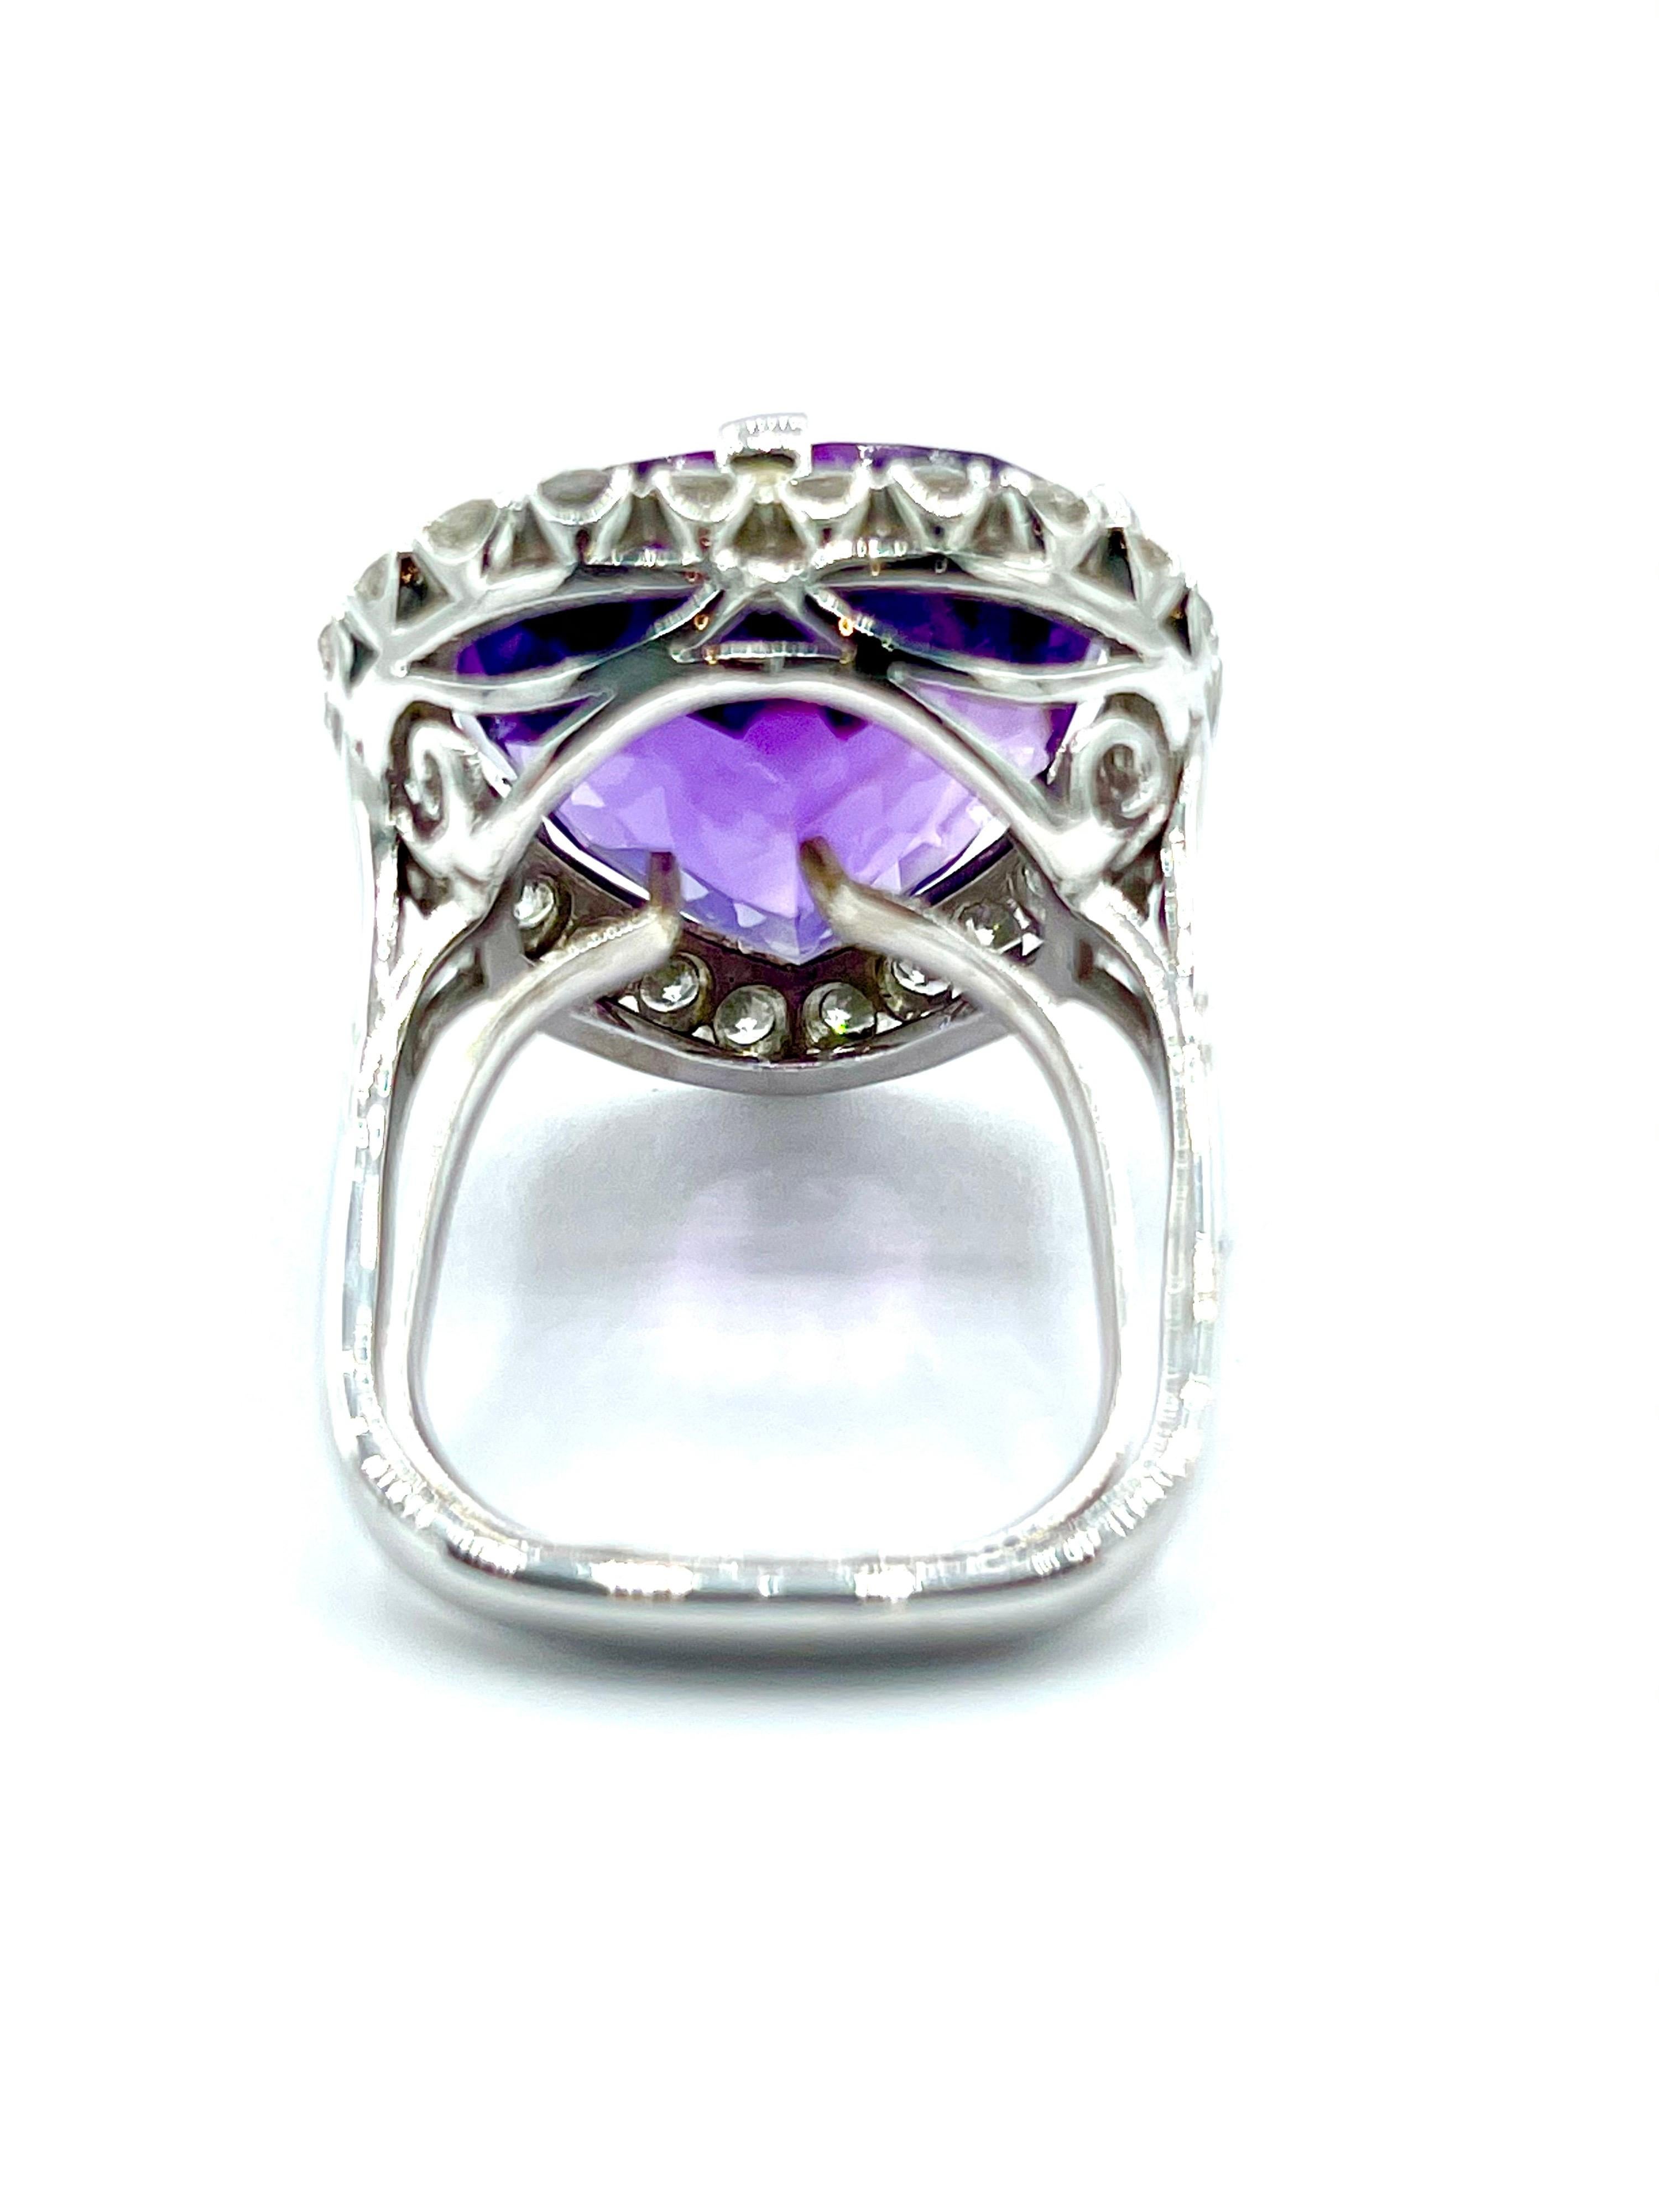 12.88 Carat Heart Shape Amethyst and Diamond Ring For Sale 1